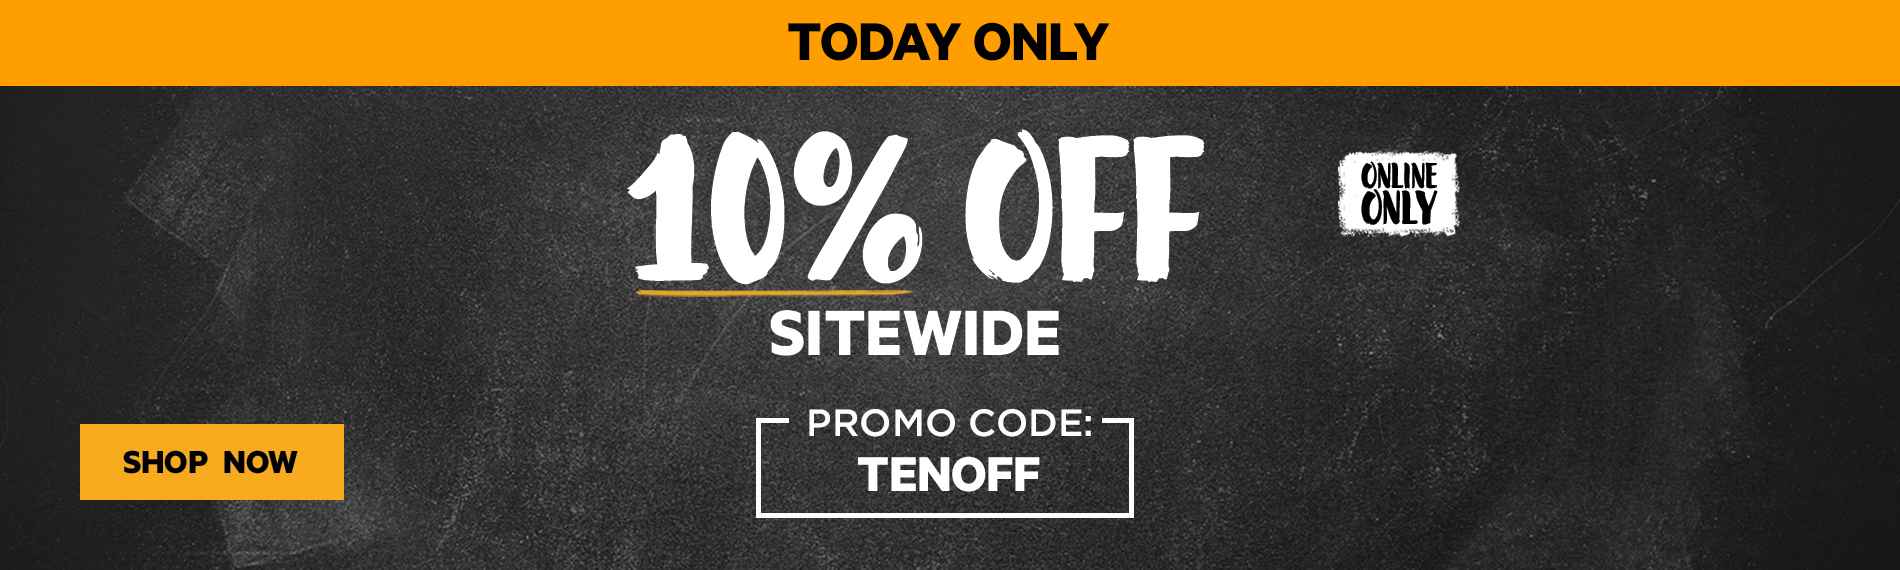 10% OFF sitewide